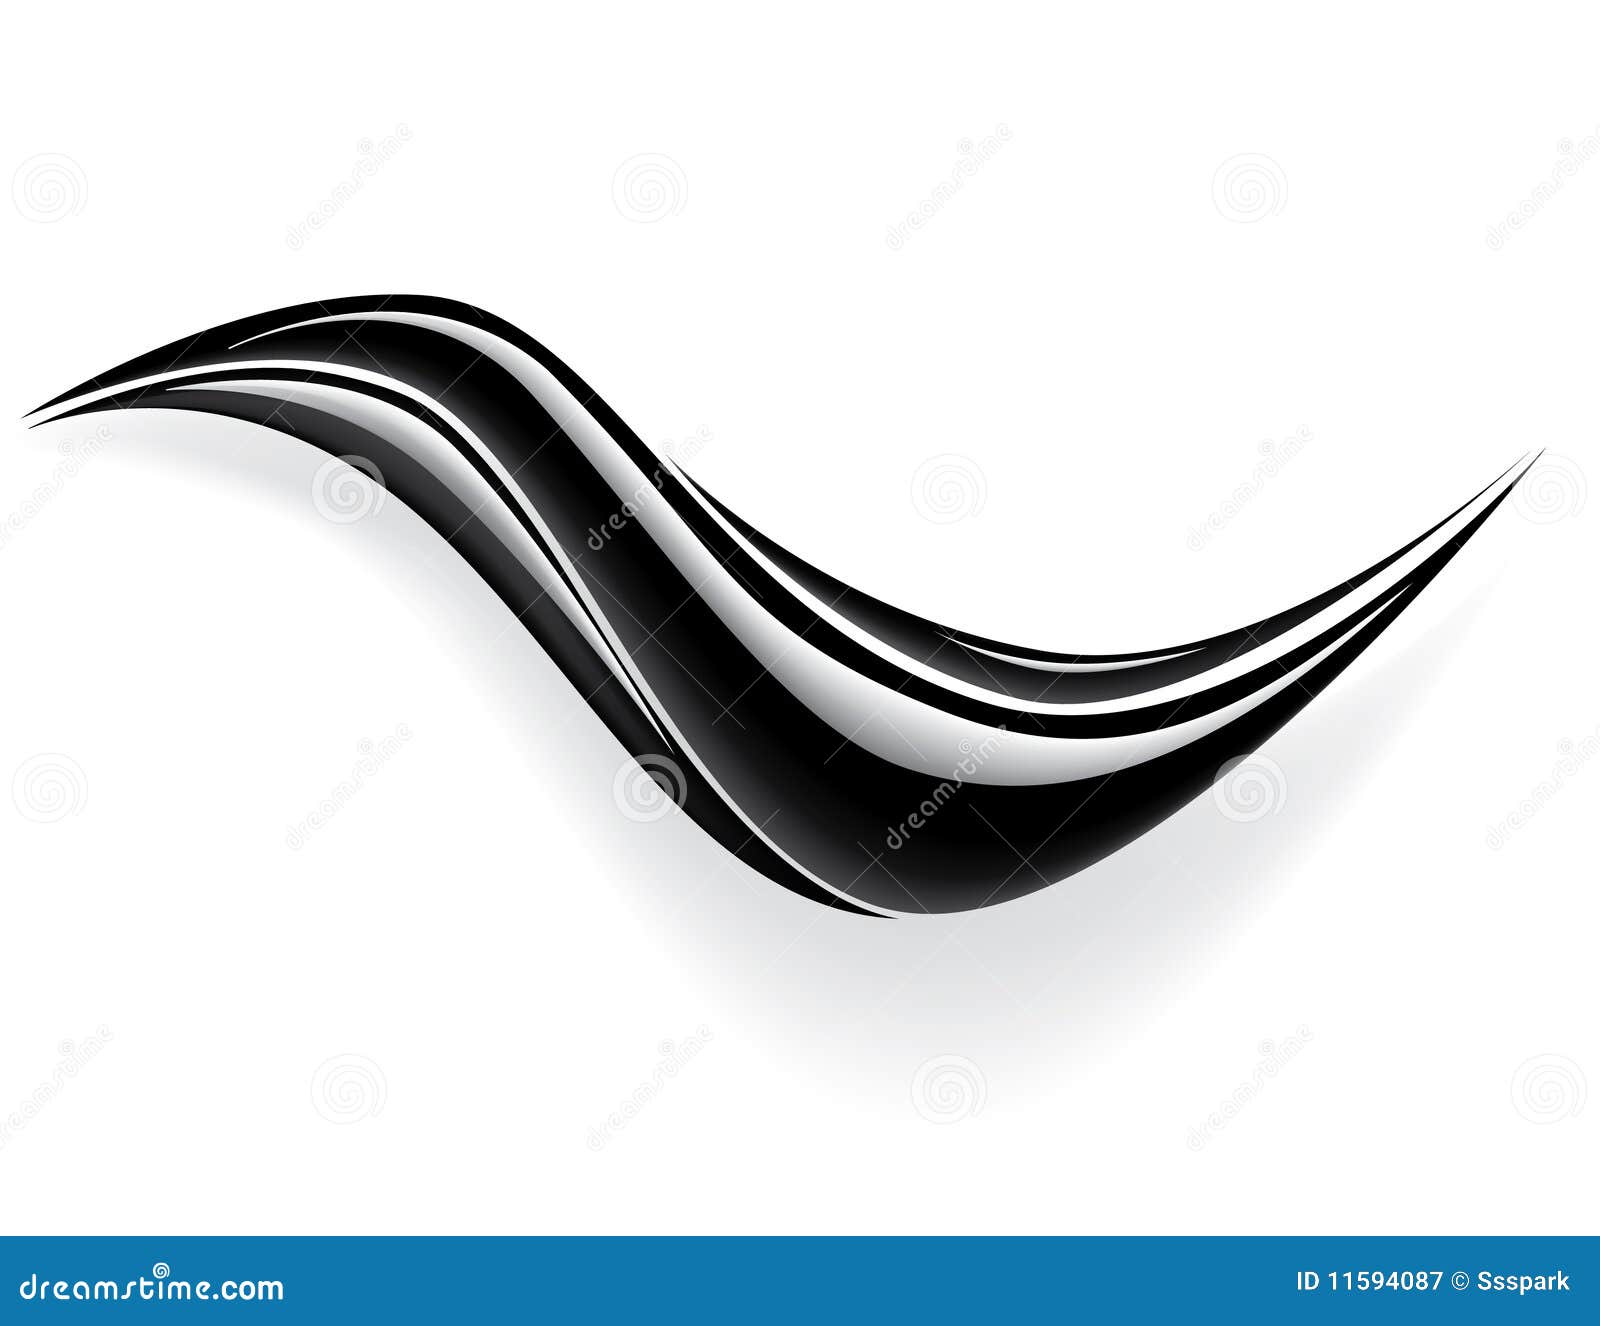 Black wave vector stock vector. Illustration of abstract - 11594087